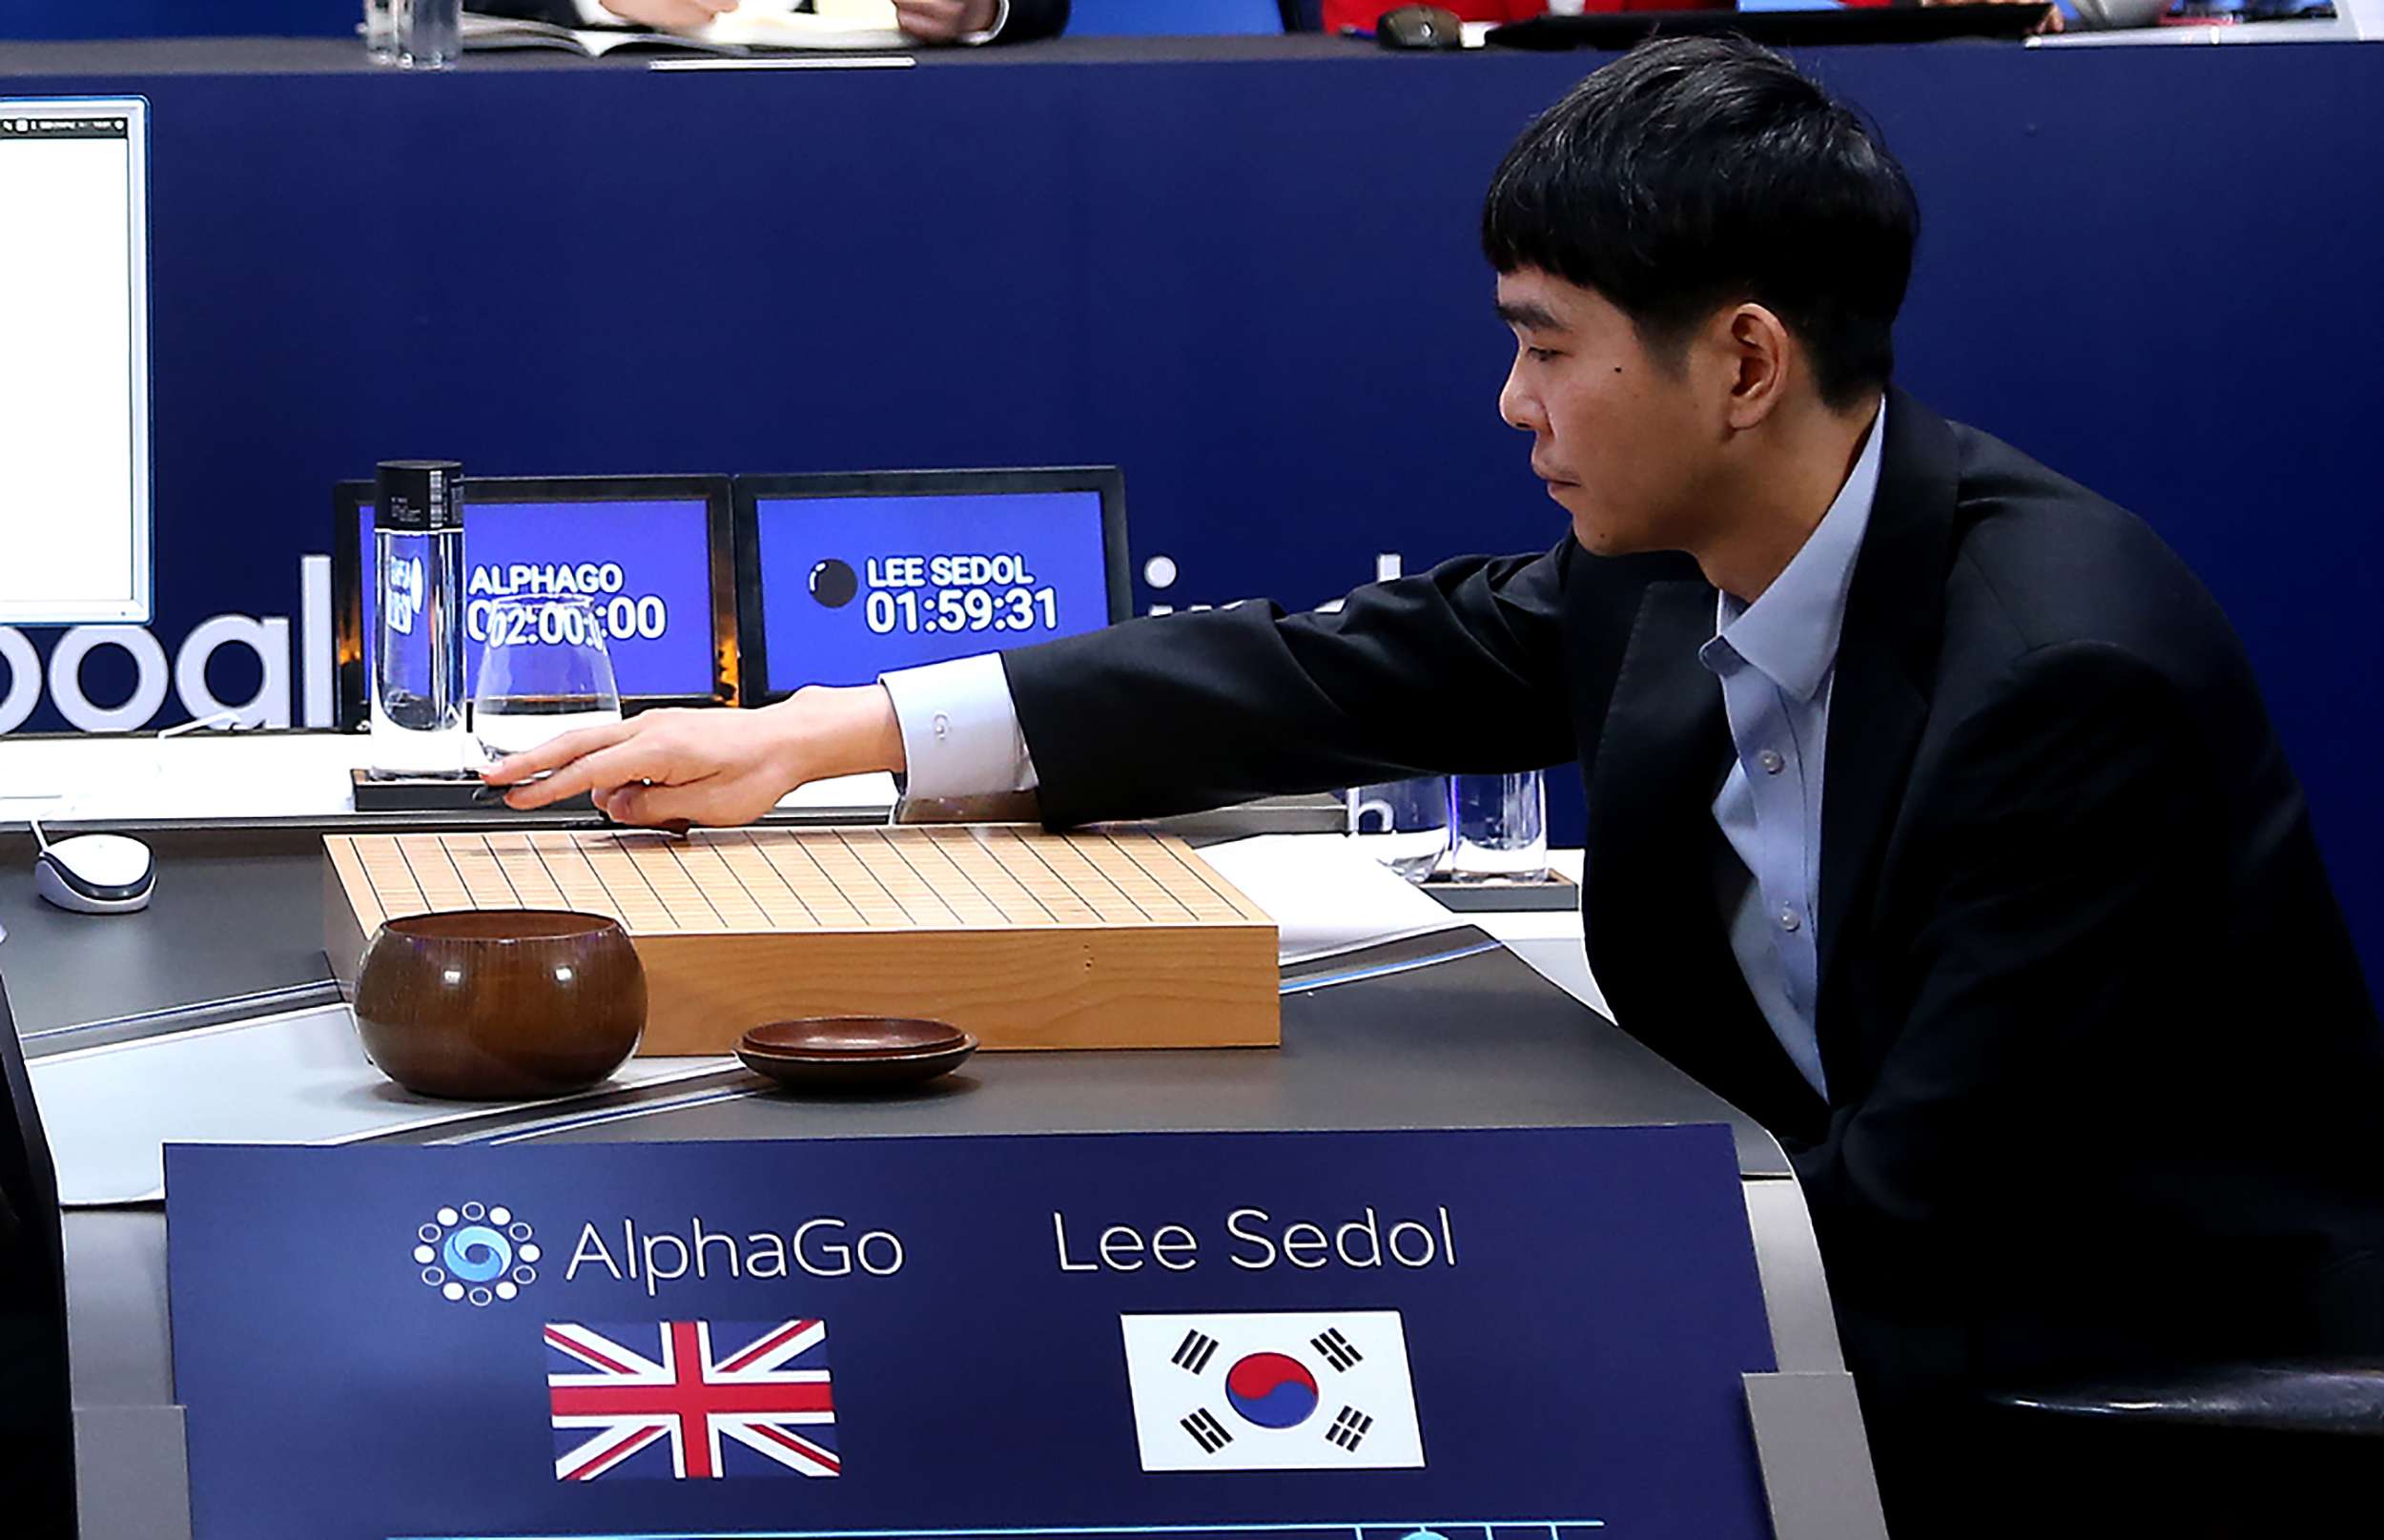 The defeat of a Go grandmaster at the hands of a Google computer shows AI is here to stay. And Asia can take the lead as we wave goodbye to human fallibility